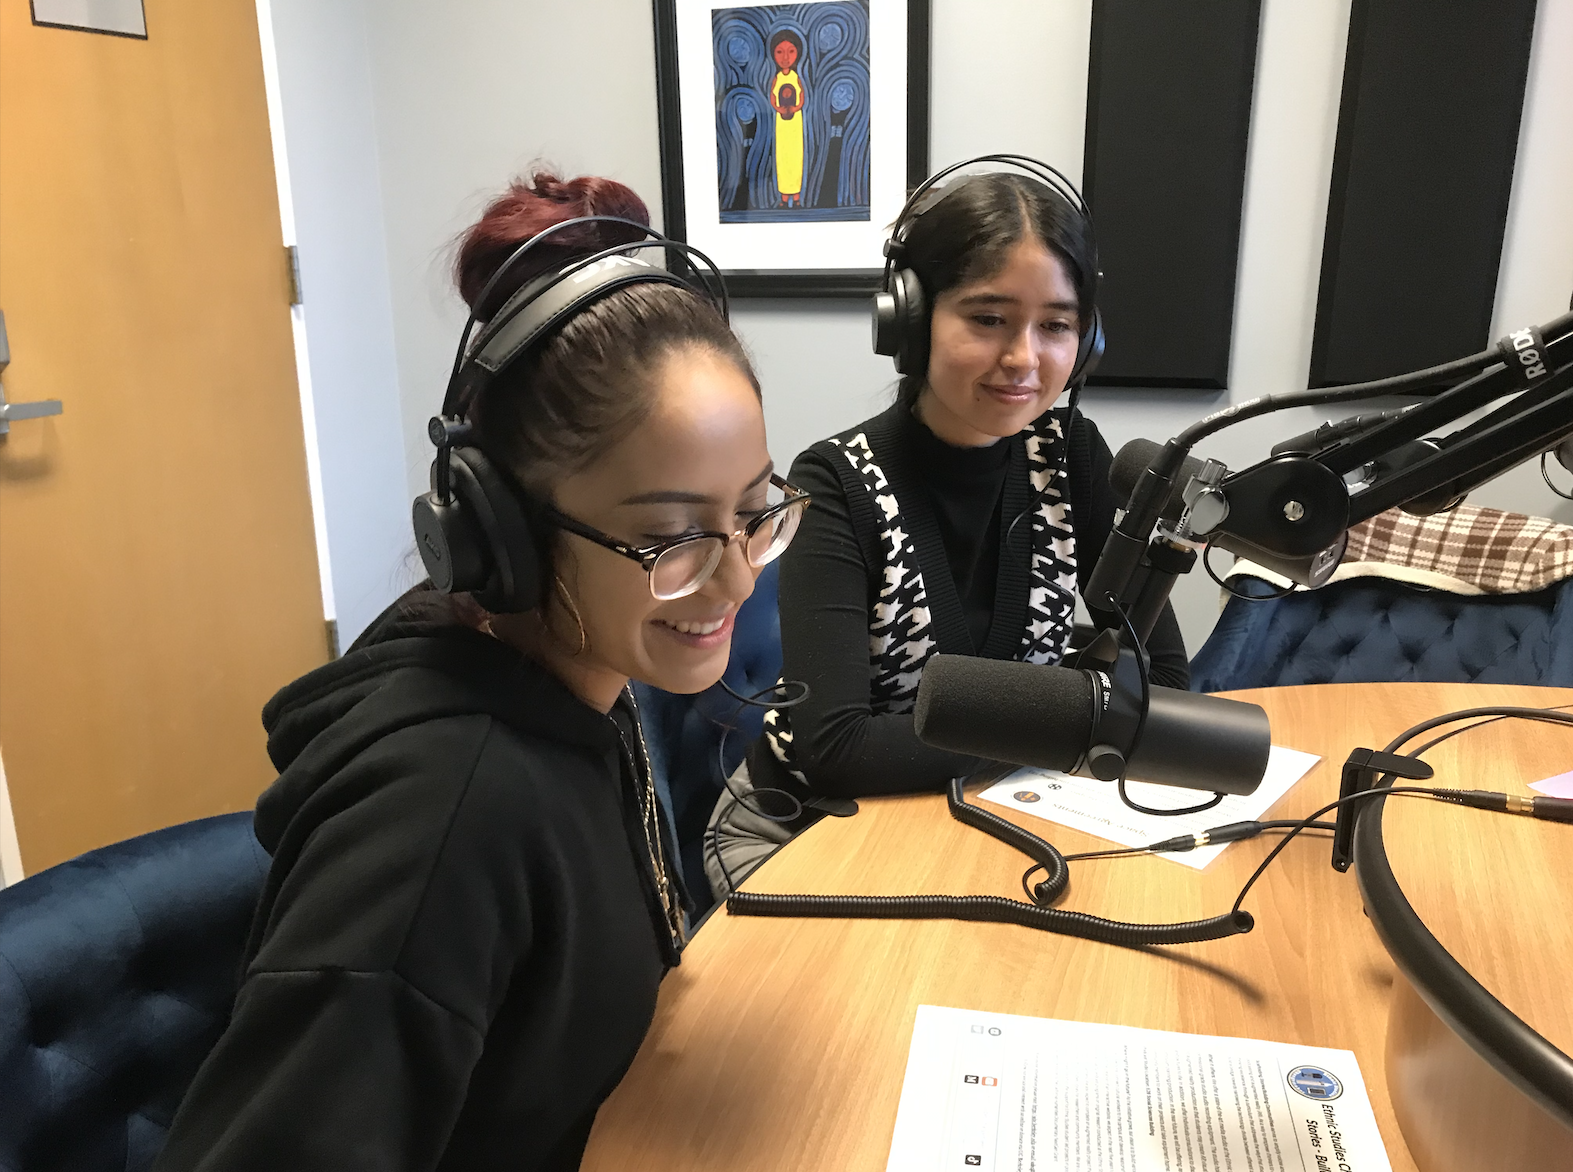 Two students smile as they speak into a microphone while sitting at a table. They are also wearing headphones and speaking as part of a podcast.